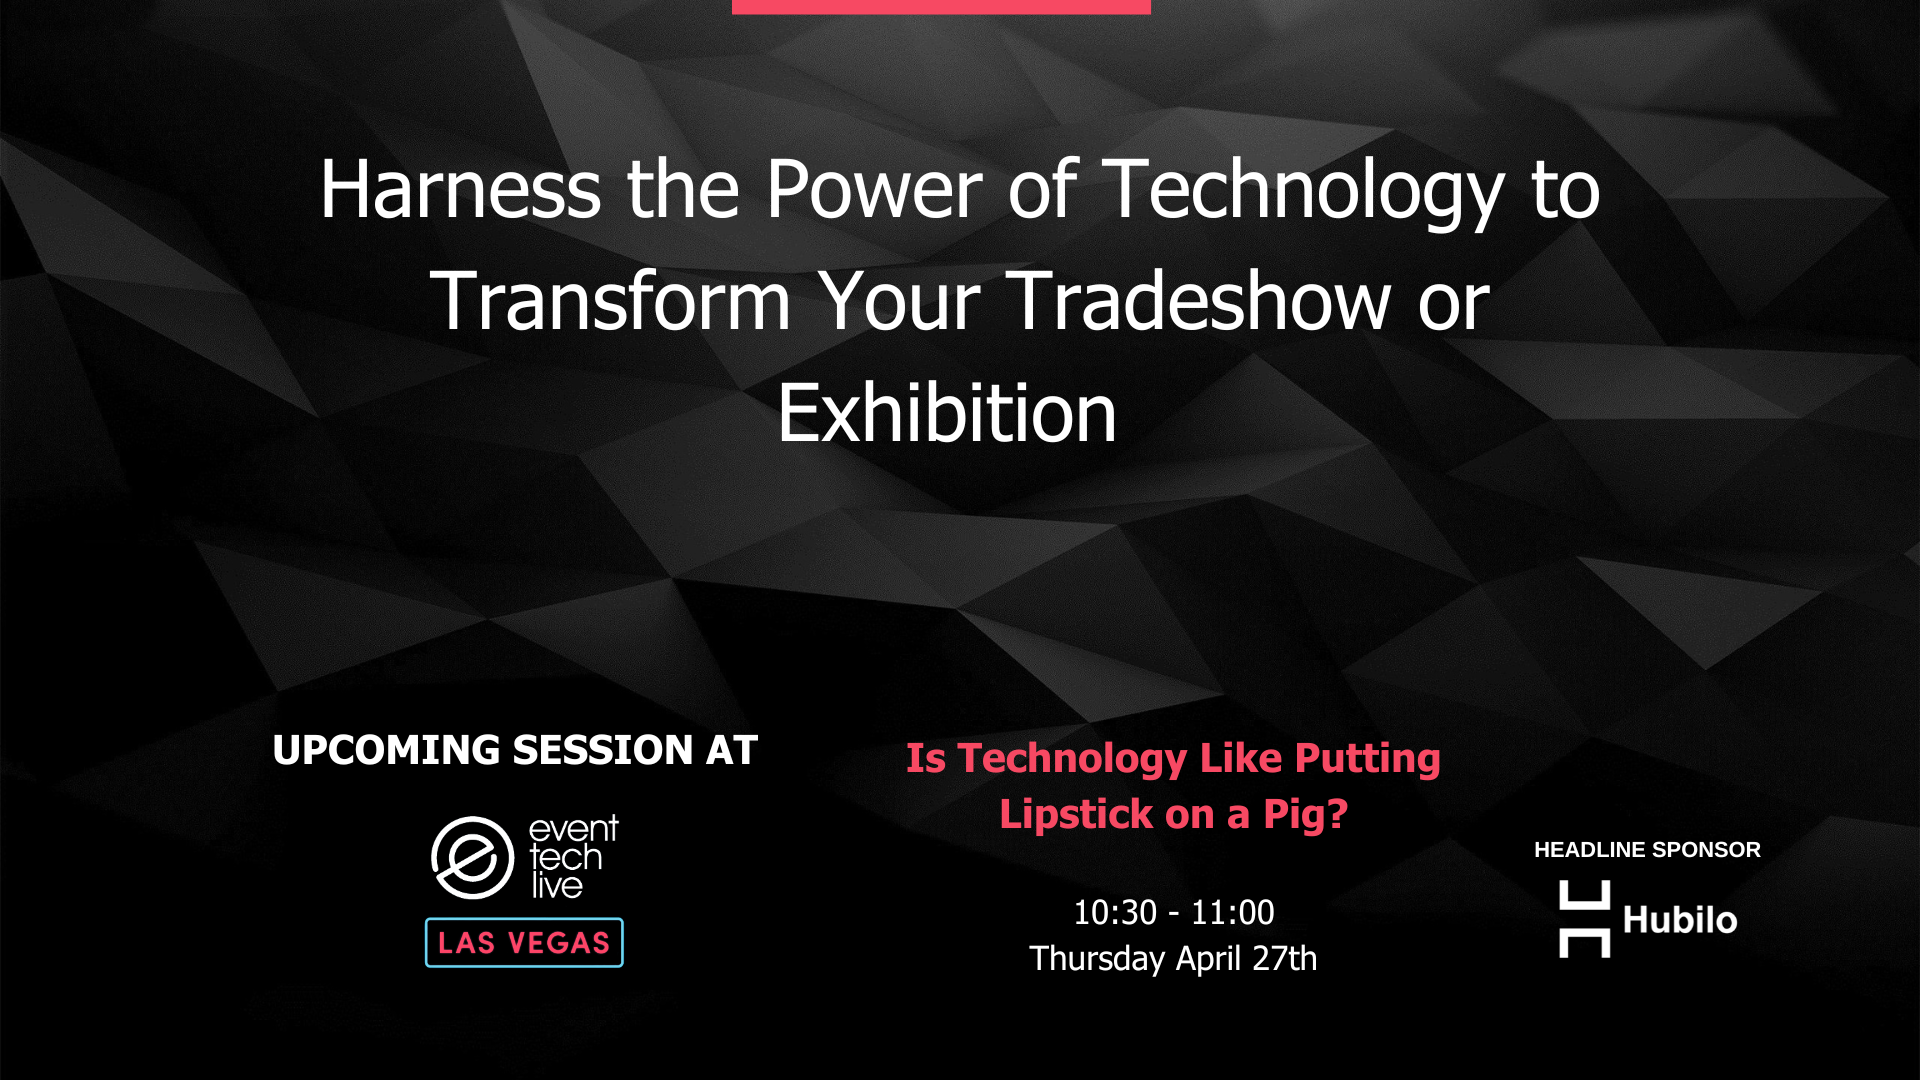 Harness the Power of Technology to Transform Your Tradeshow or Exhibition